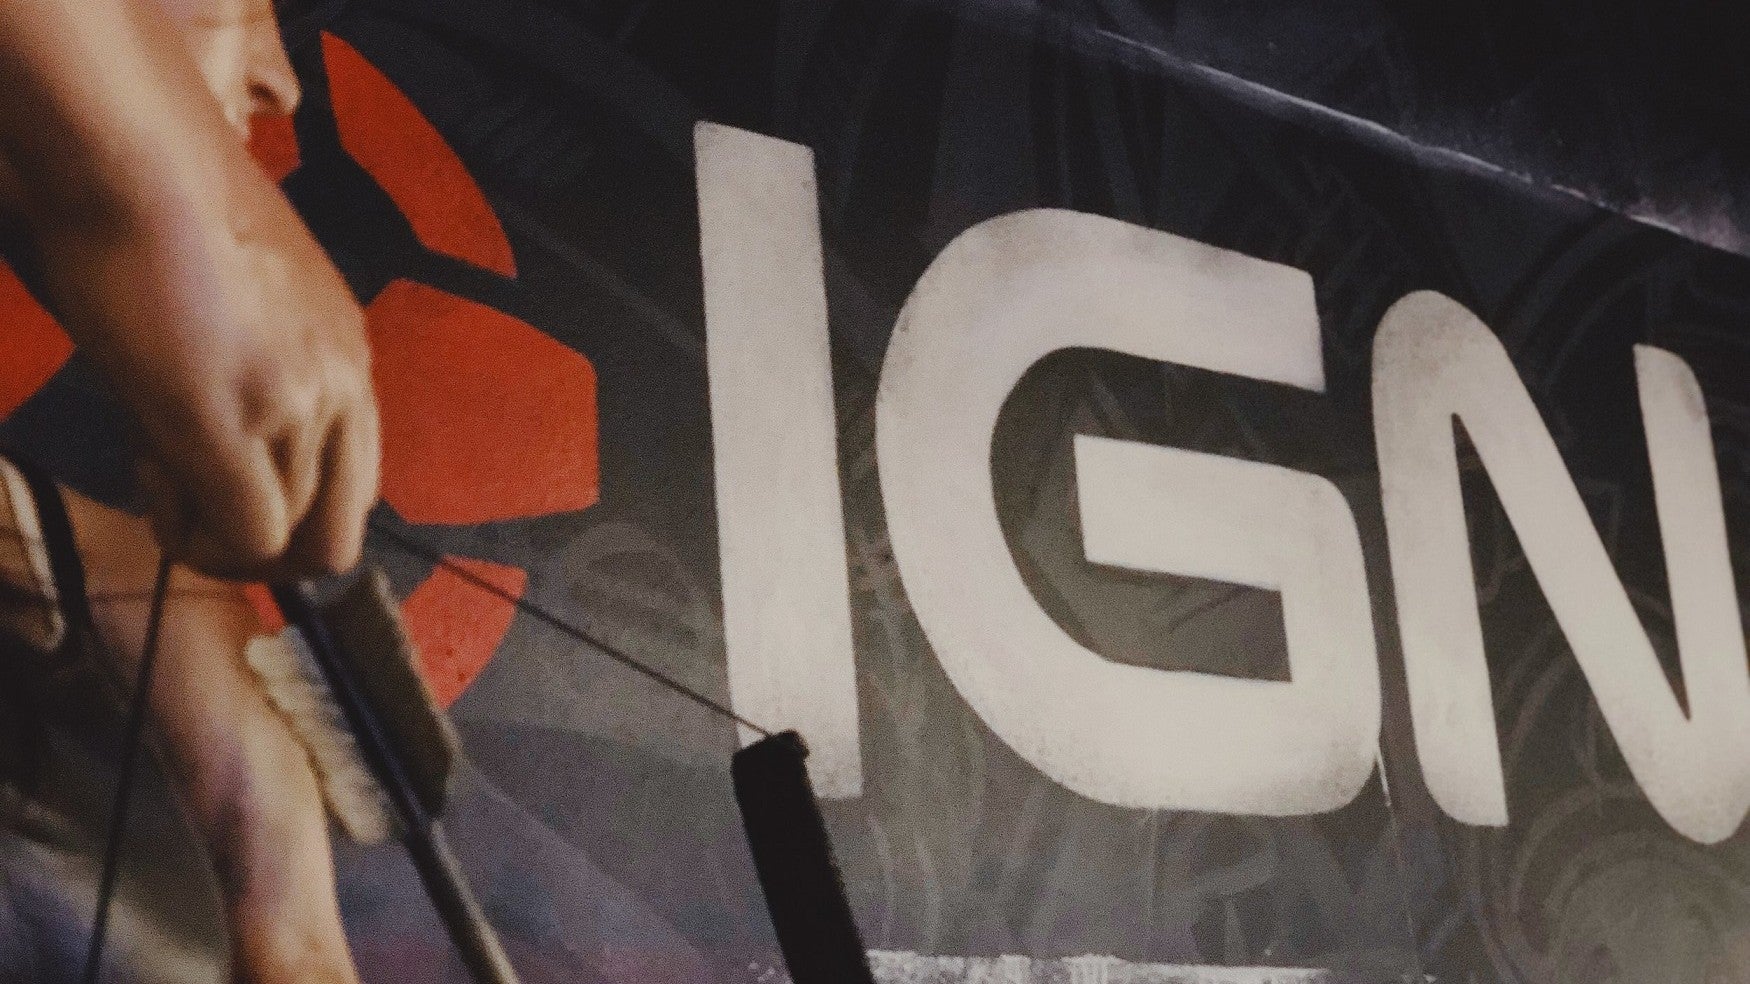 An IGN logo on the wall with what appears to be a Lara Croft statue in the extreme foreground